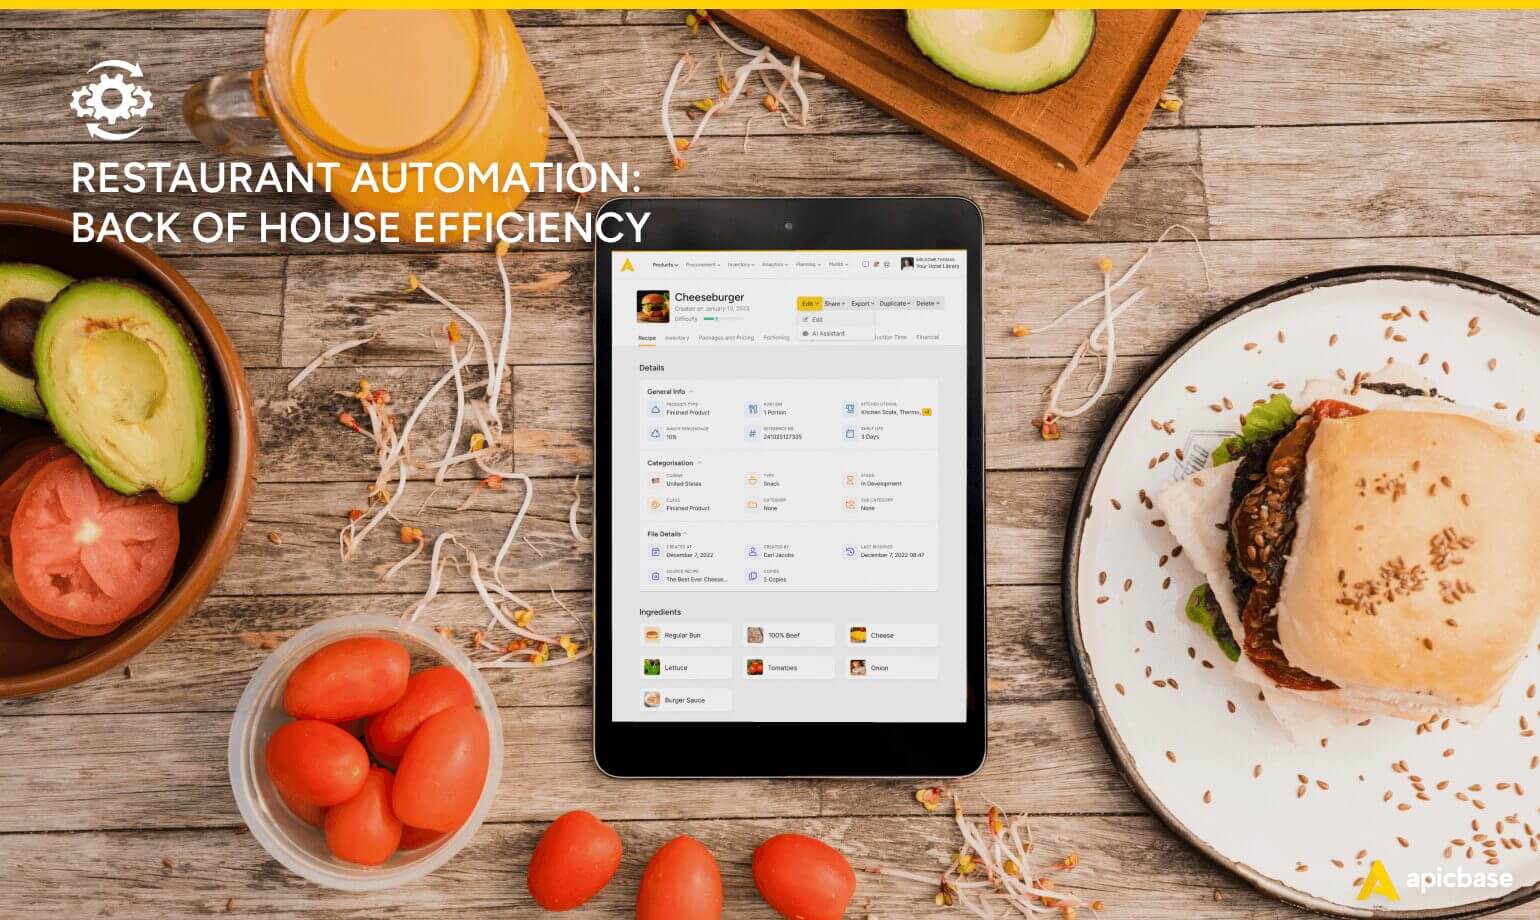 Restaurant Automation - The Key to Back of House Efficiency